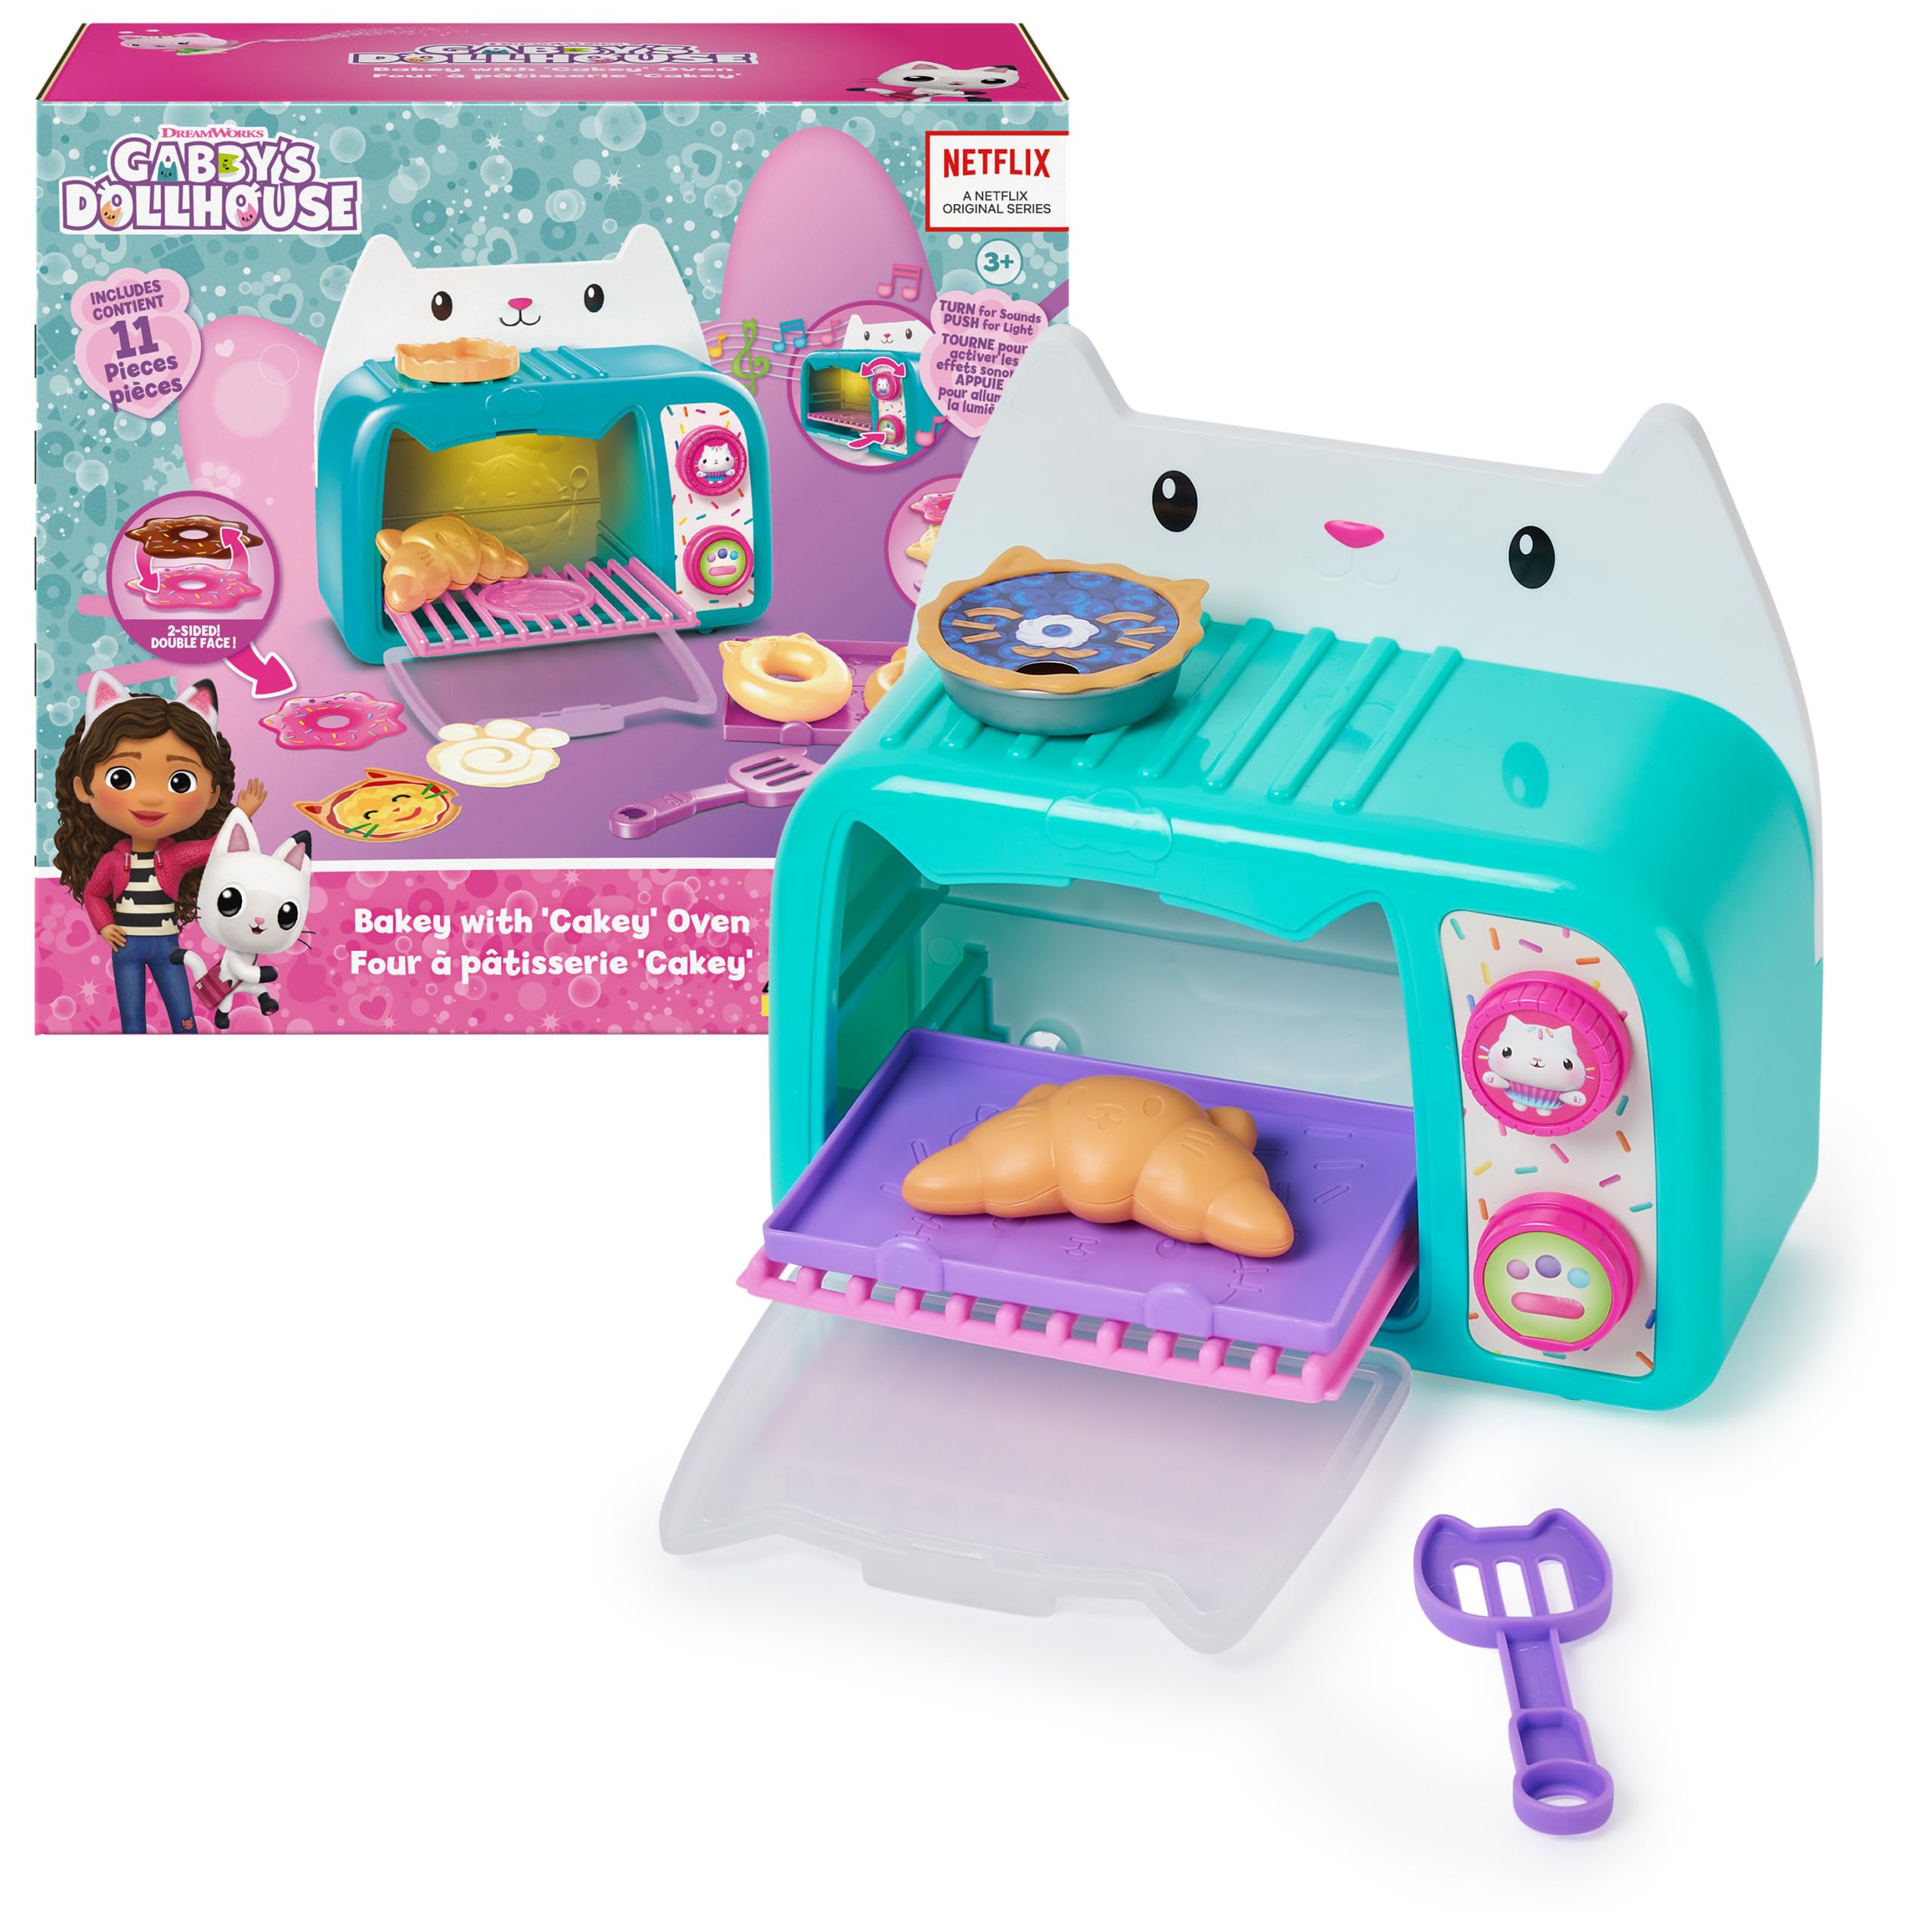 Spin Master Gabby’s Dollhouse Bakey w/ Cakey Oven, Lights & Sounds $11.24 + Free Shipping w/ Prime or on $35+